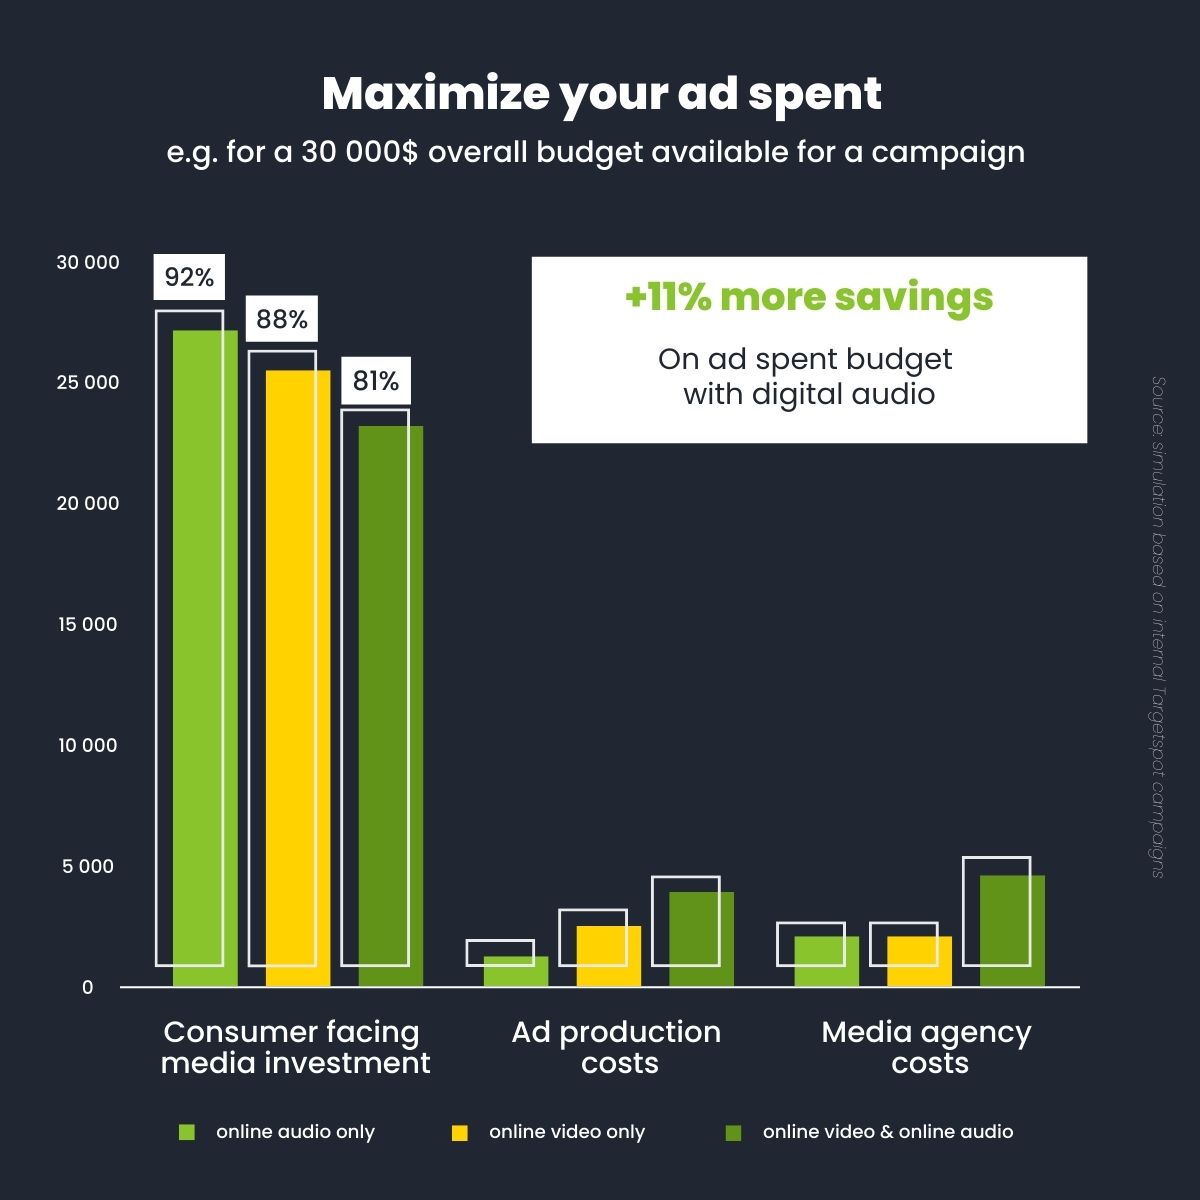 Maximize your ad spent